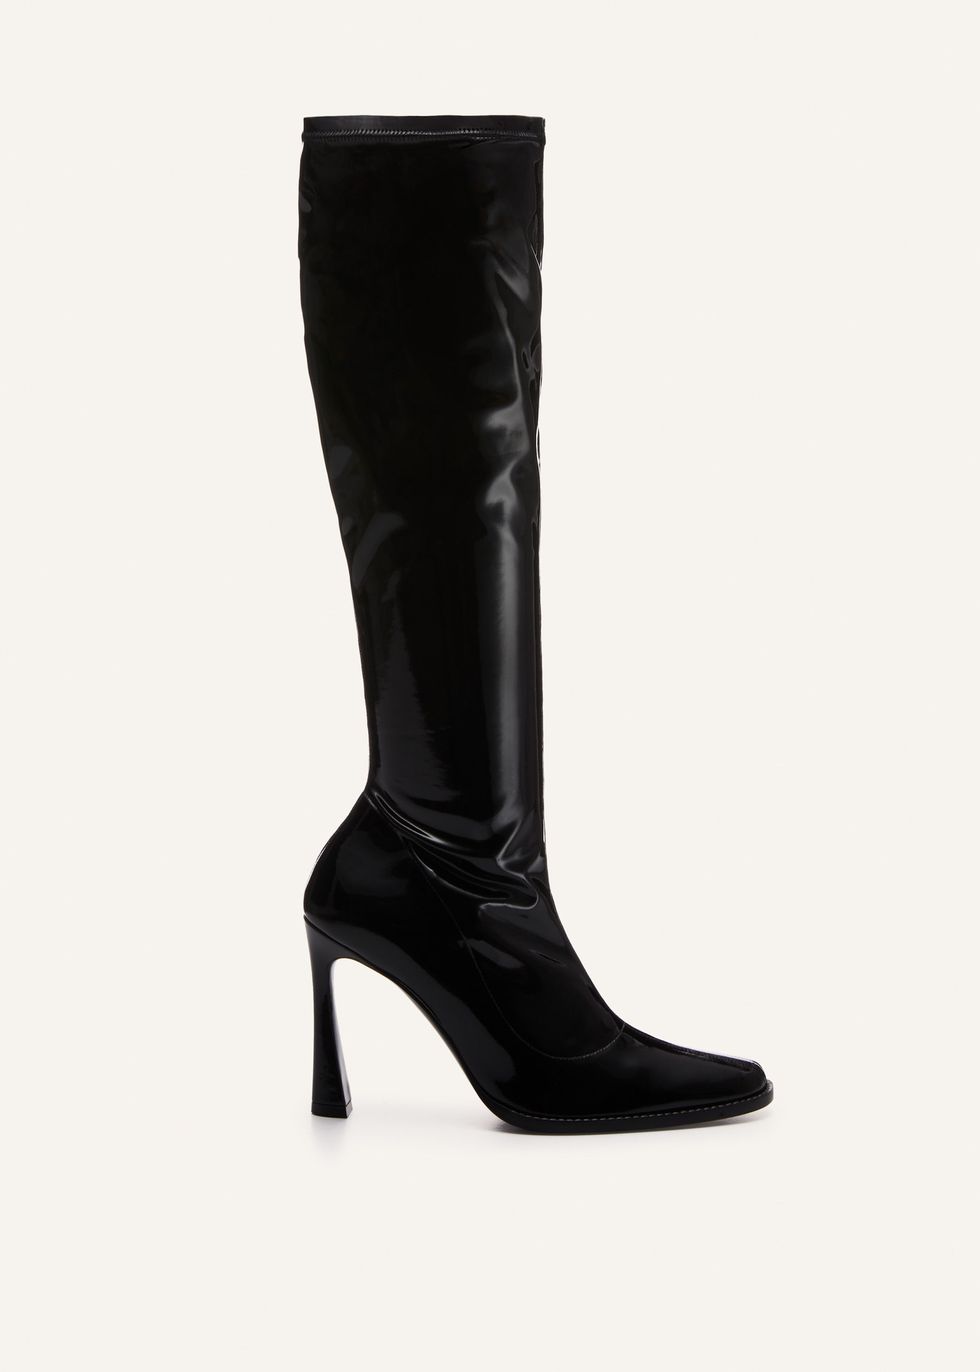 Knee high boots in black patent leather